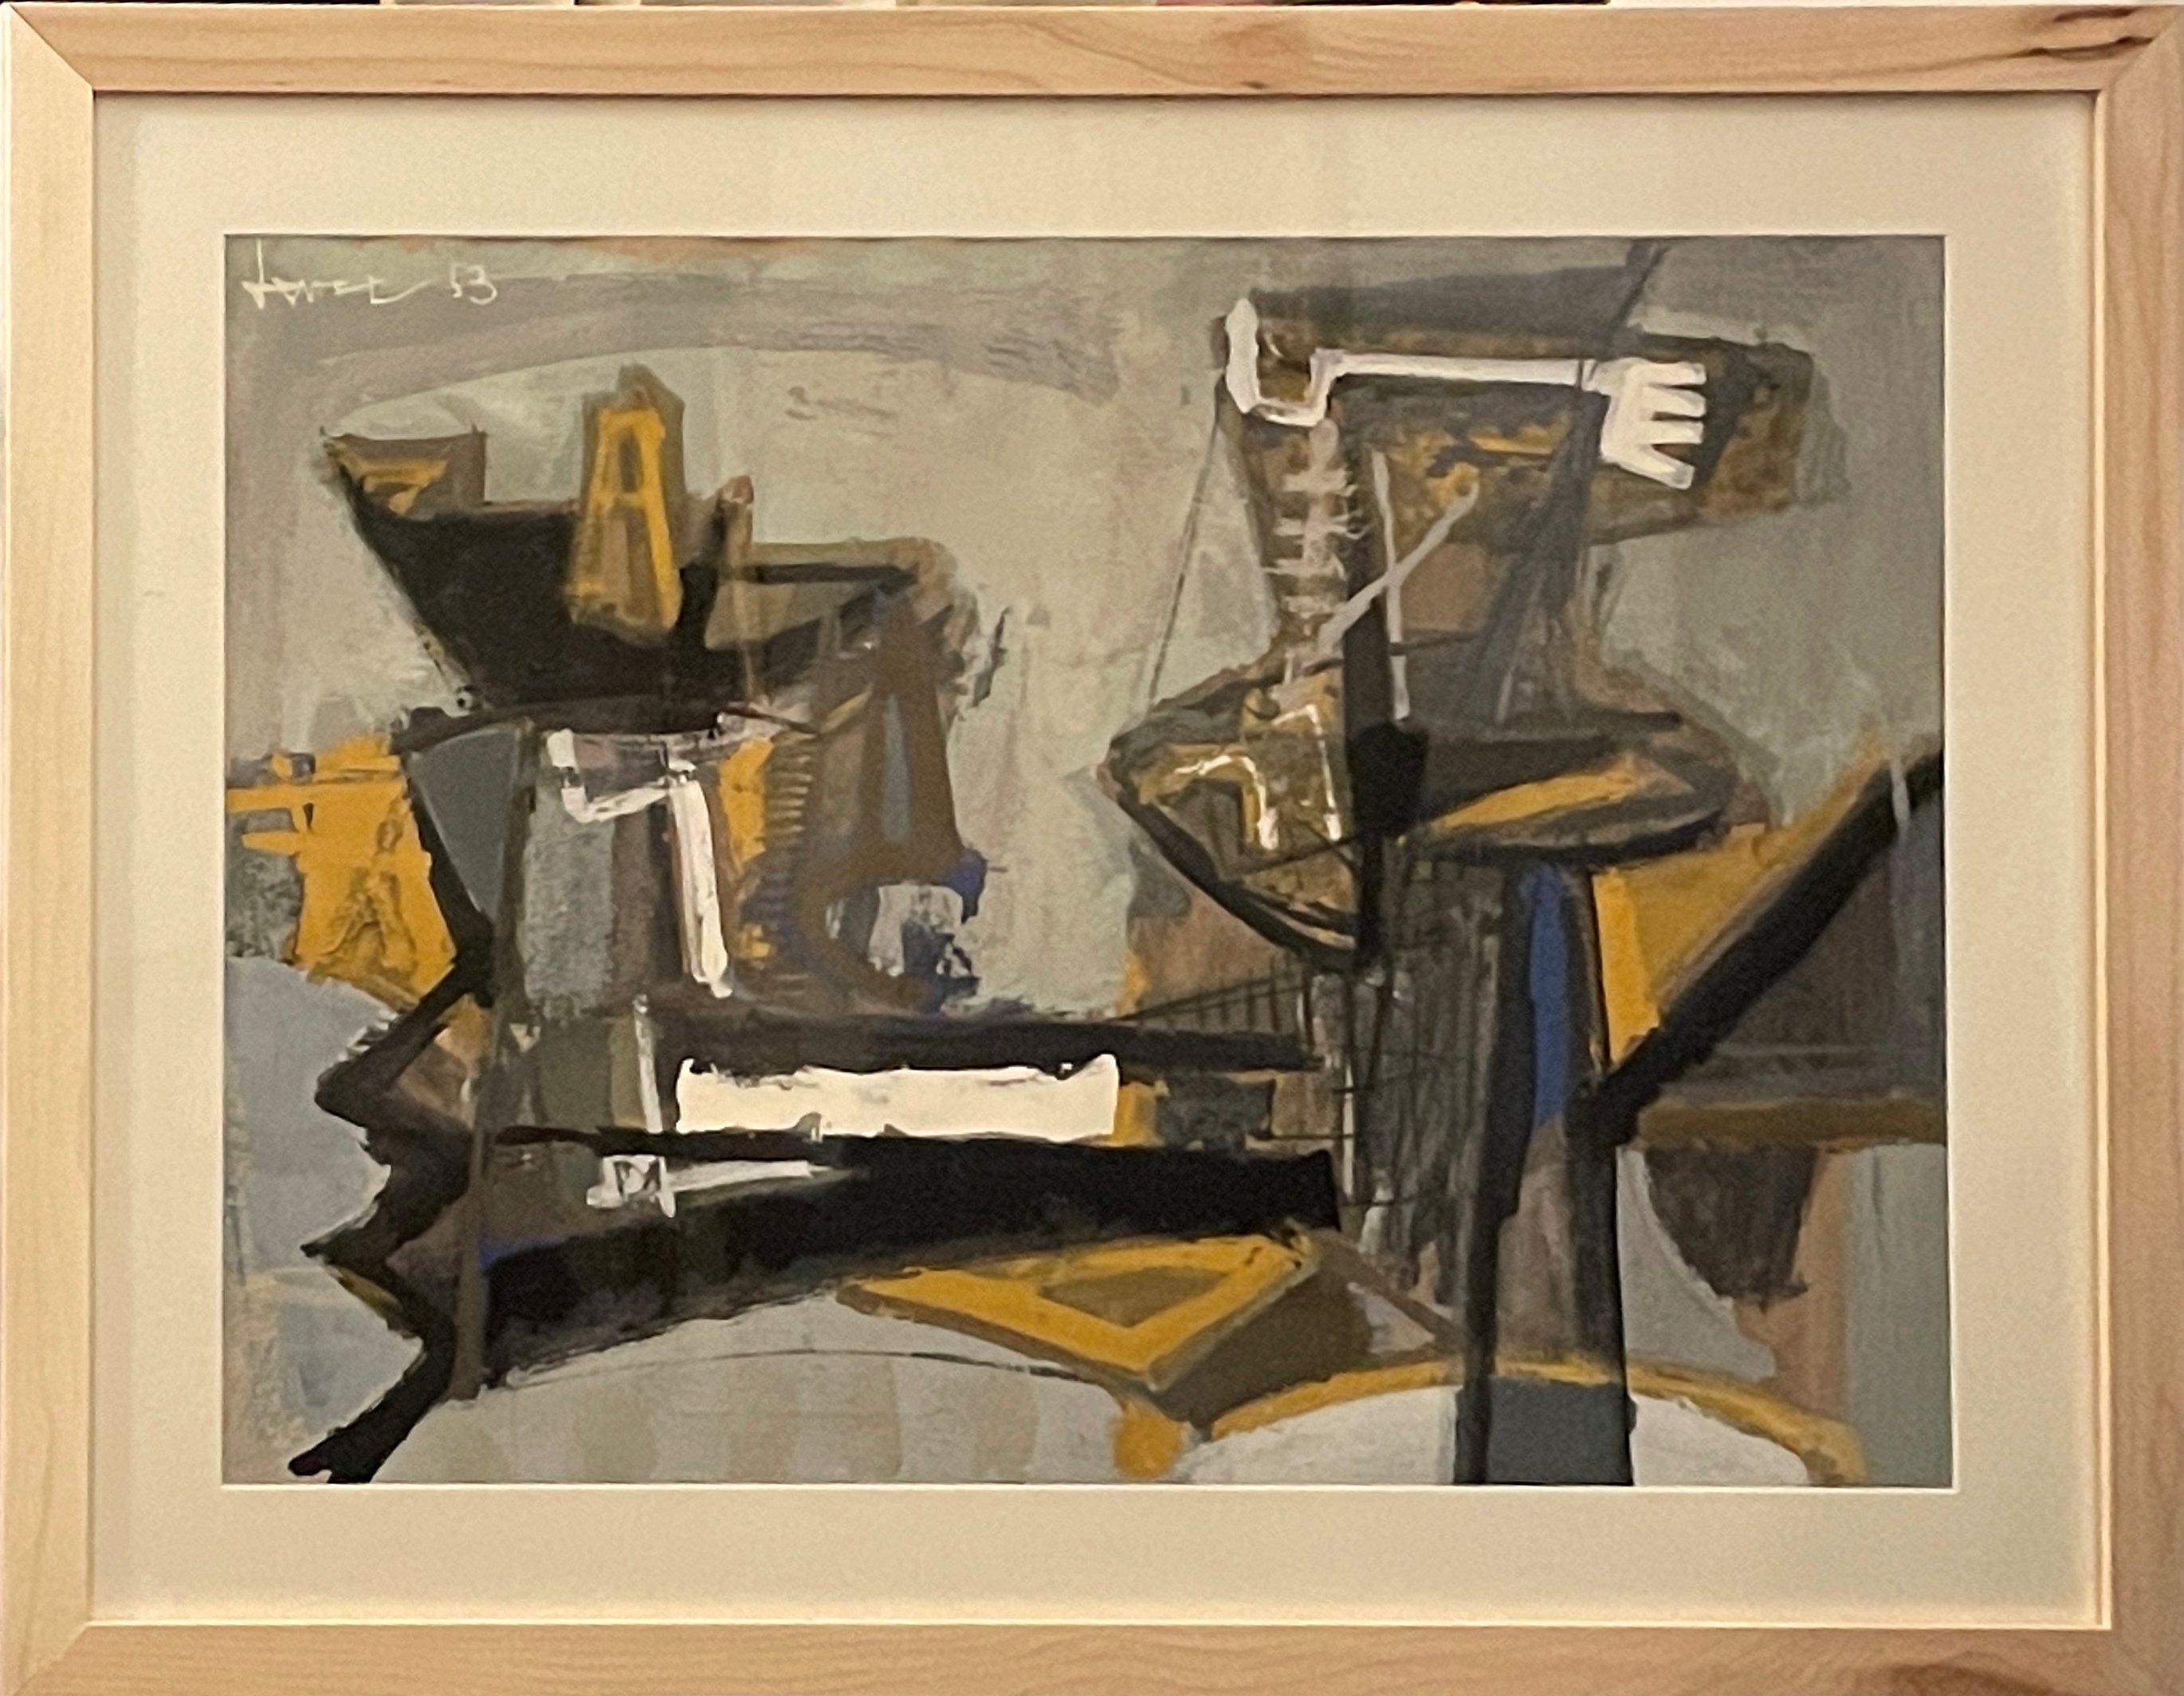 John Levee (1924 - 2017)
Untitled, 1953
Gouache on paper
17 1/2 x 24 1/2 inches
Signed and dated upper left

Provenance:
Private Collection, Torrance, California
Private Collection, Valley Village, California

Exhibited:
Cleveland Museum of Art,